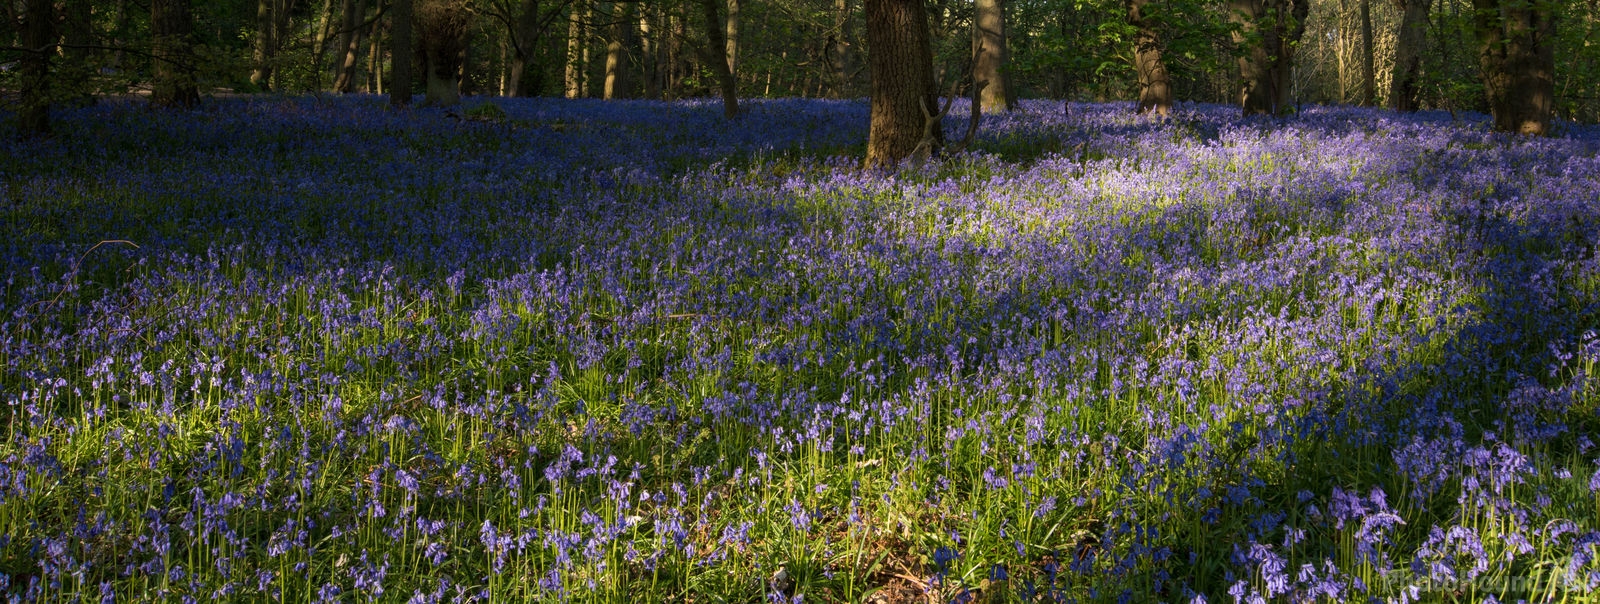 Image of Middleton Woods by Richard Lizzimore